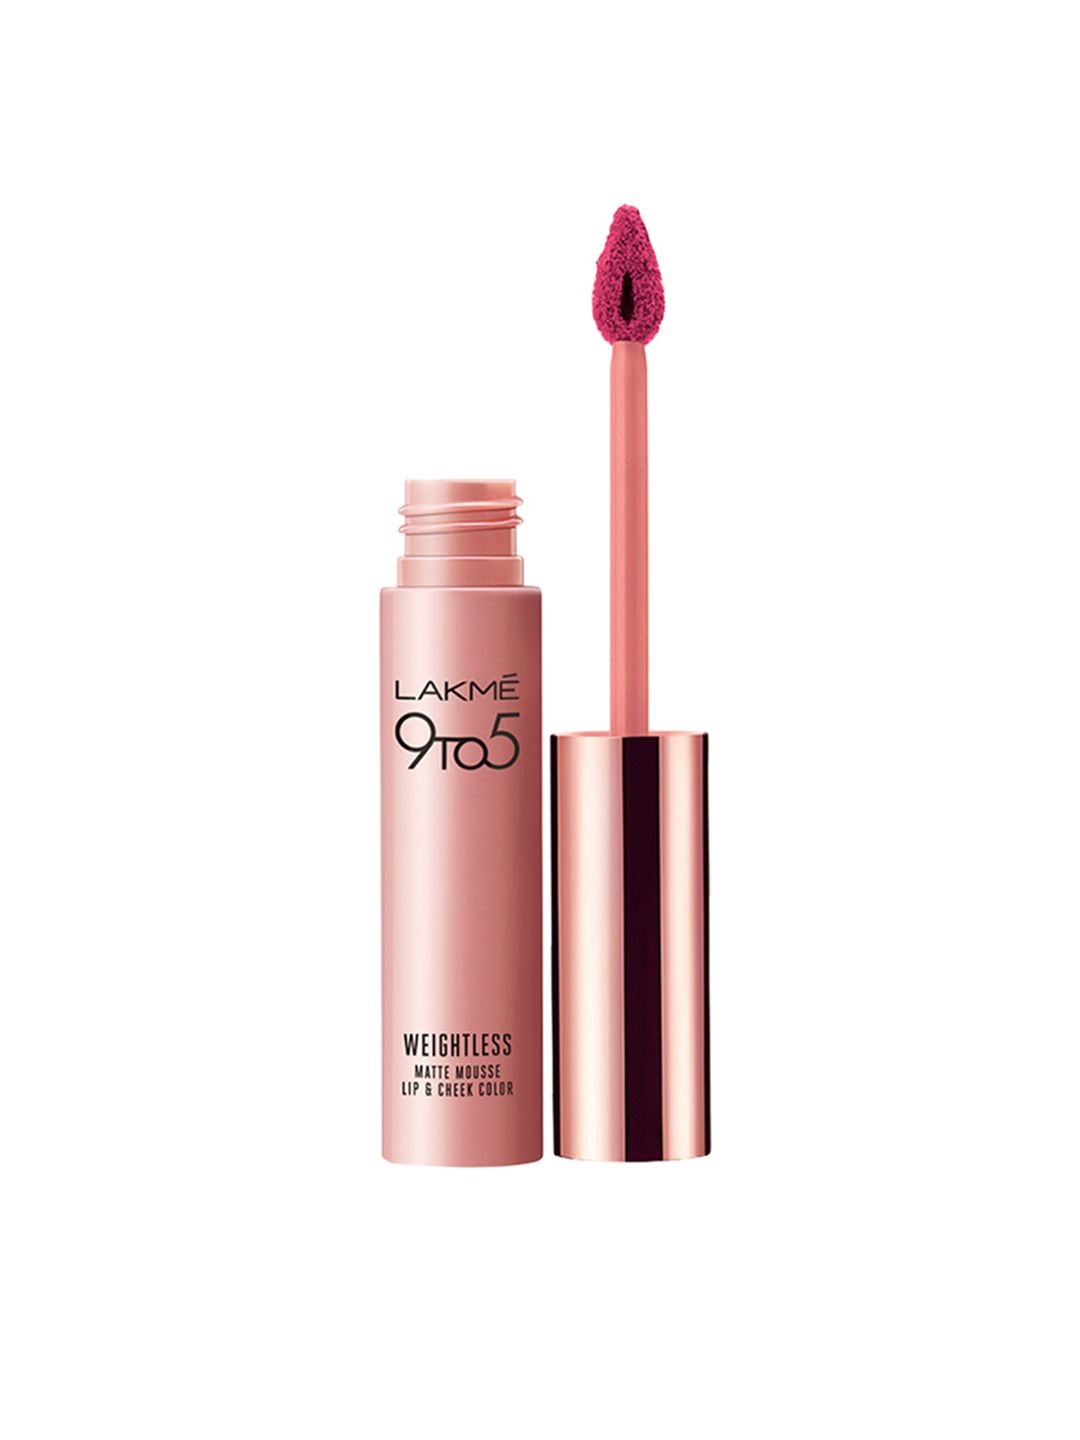 Lakme 9to5 Weightless Matte Mousse Lip & Cheek Color Lipstick Fuchsia Suede Price in India